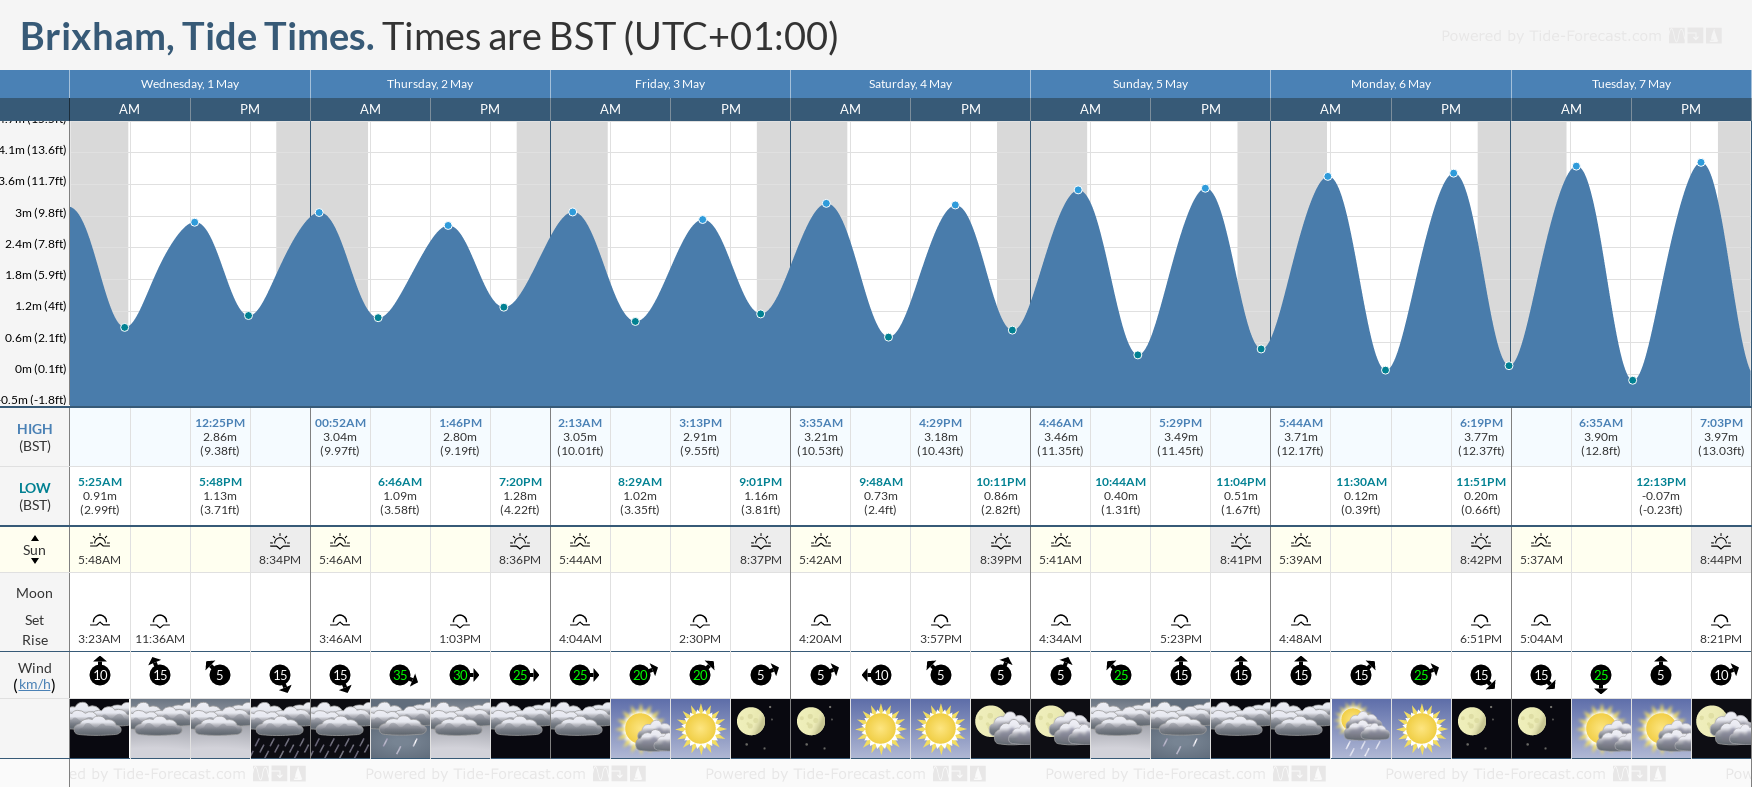 Brixham Tide Chart including high and low tide tide times for the next 7 days